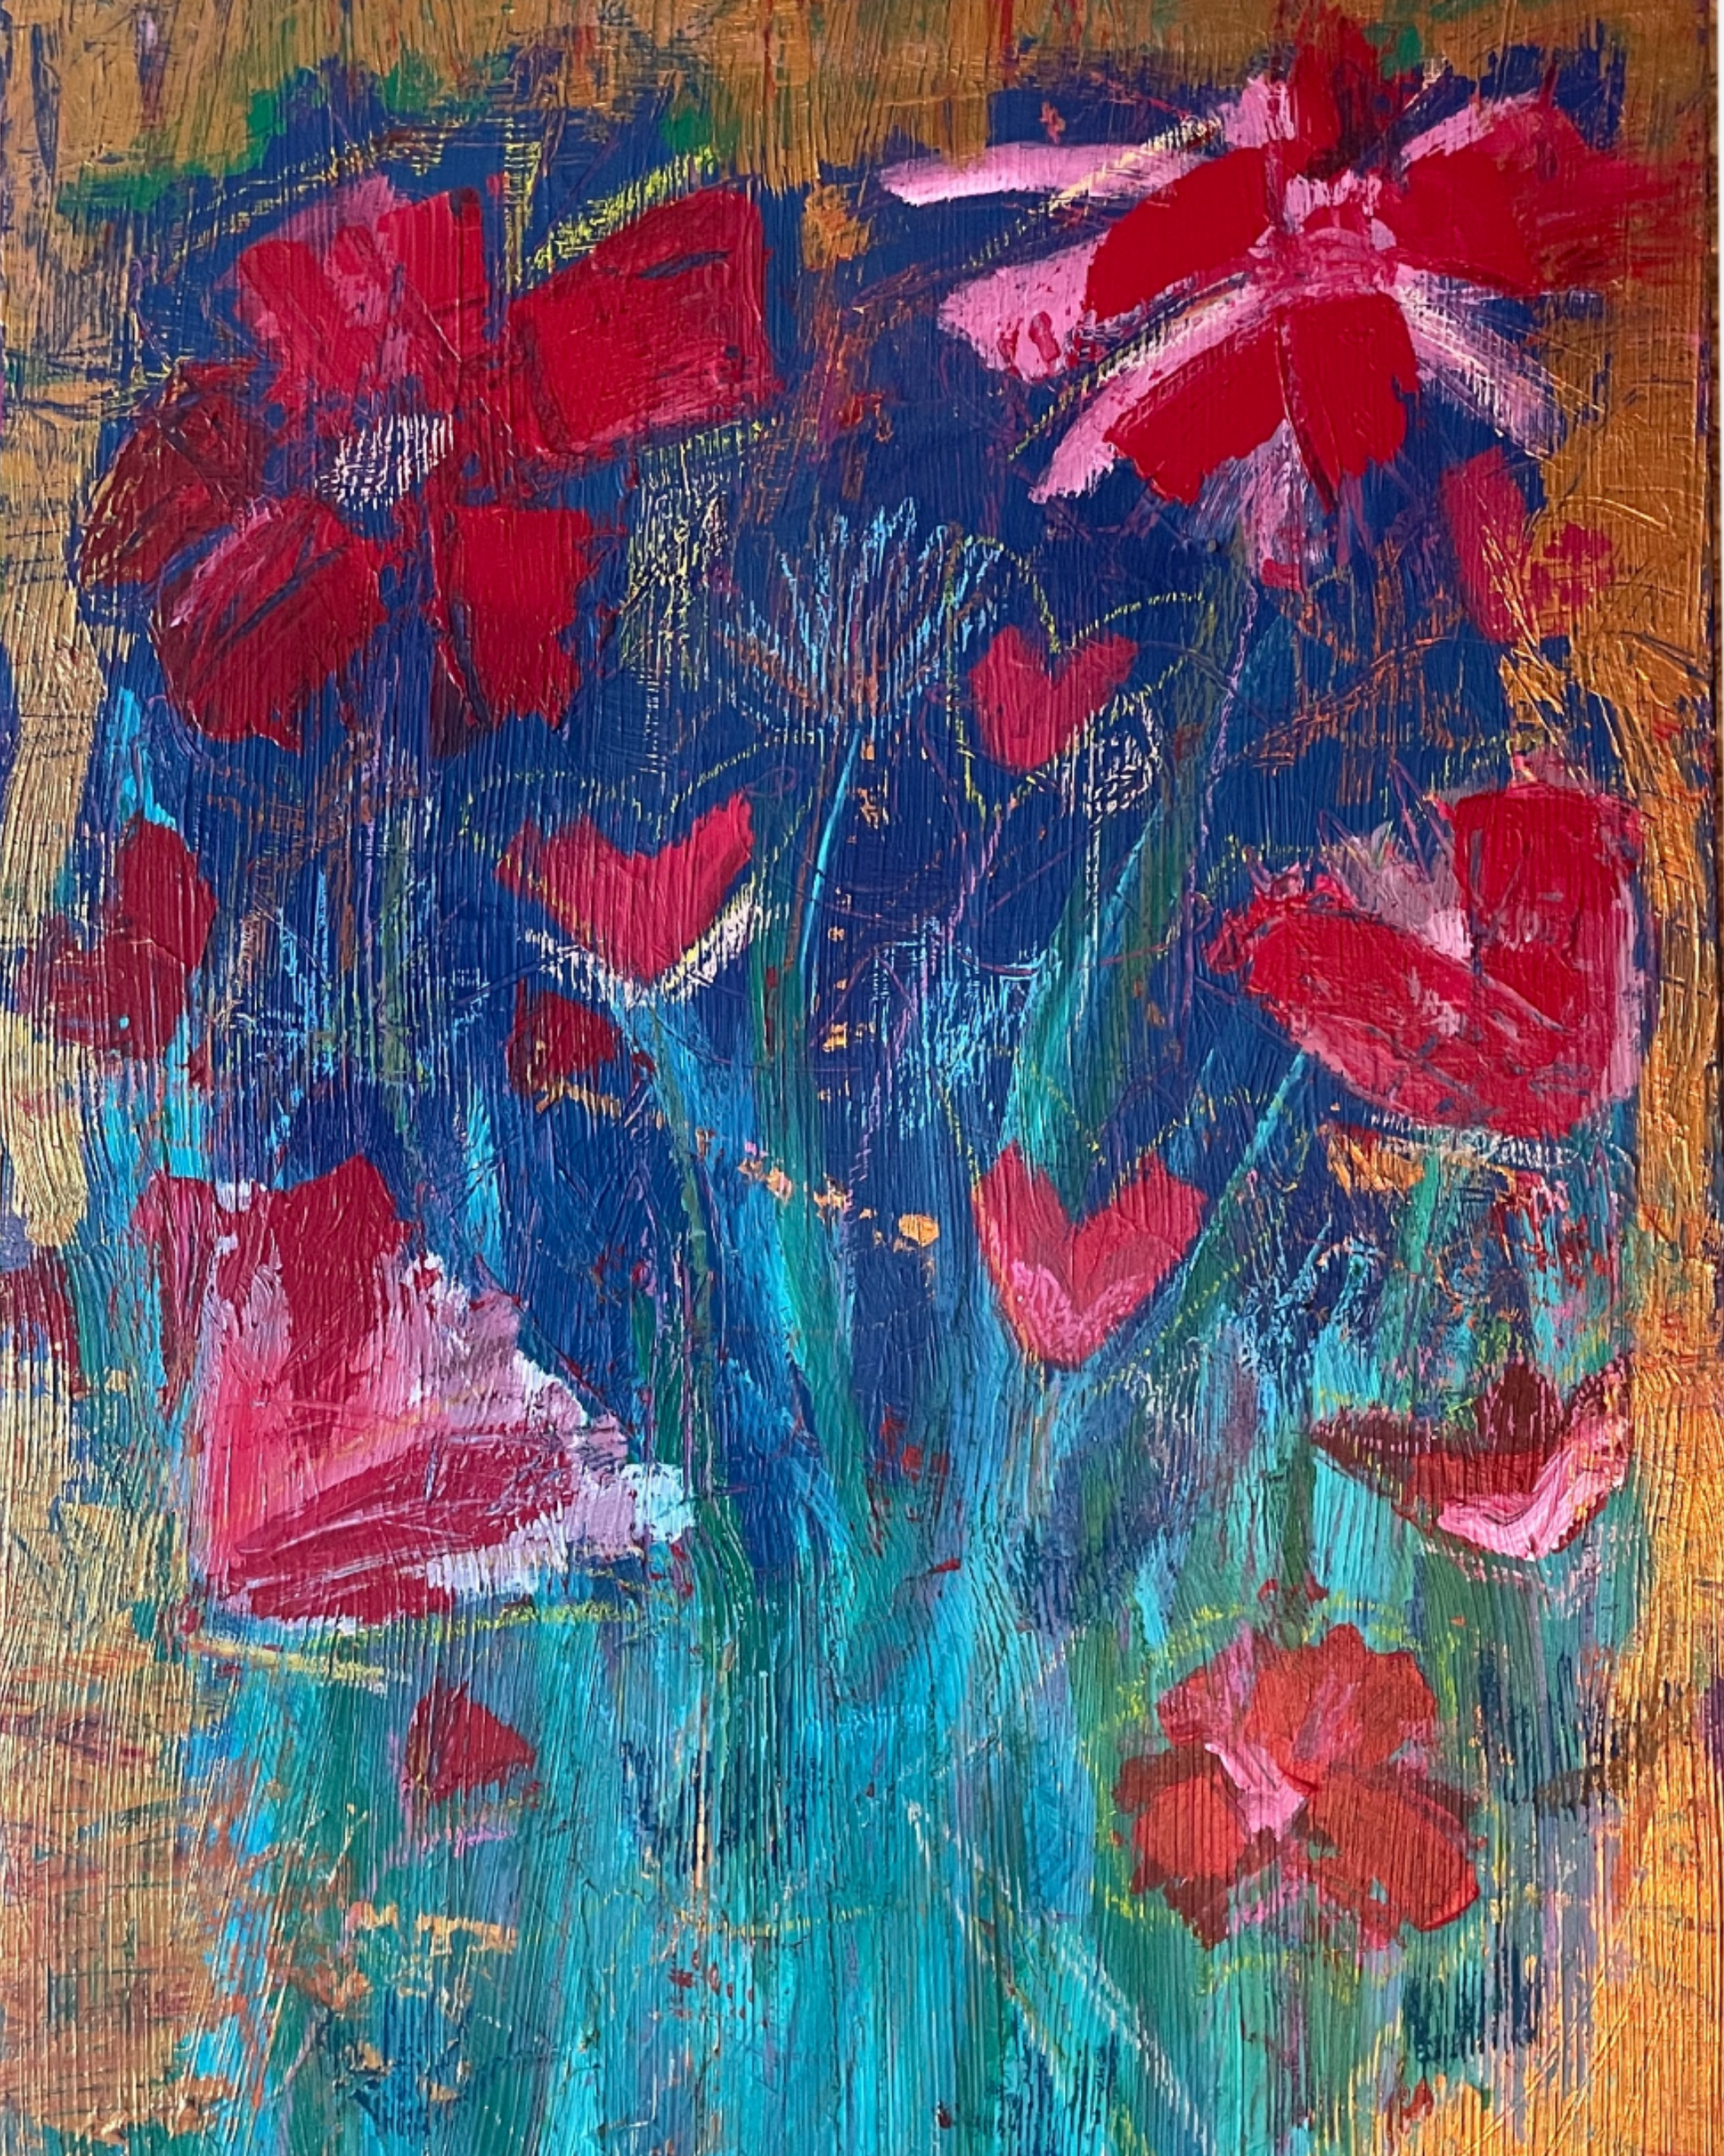 Ruby Toned Garden is a 24 x 36 original painting with mixed media on linen canvas by Kent Collective